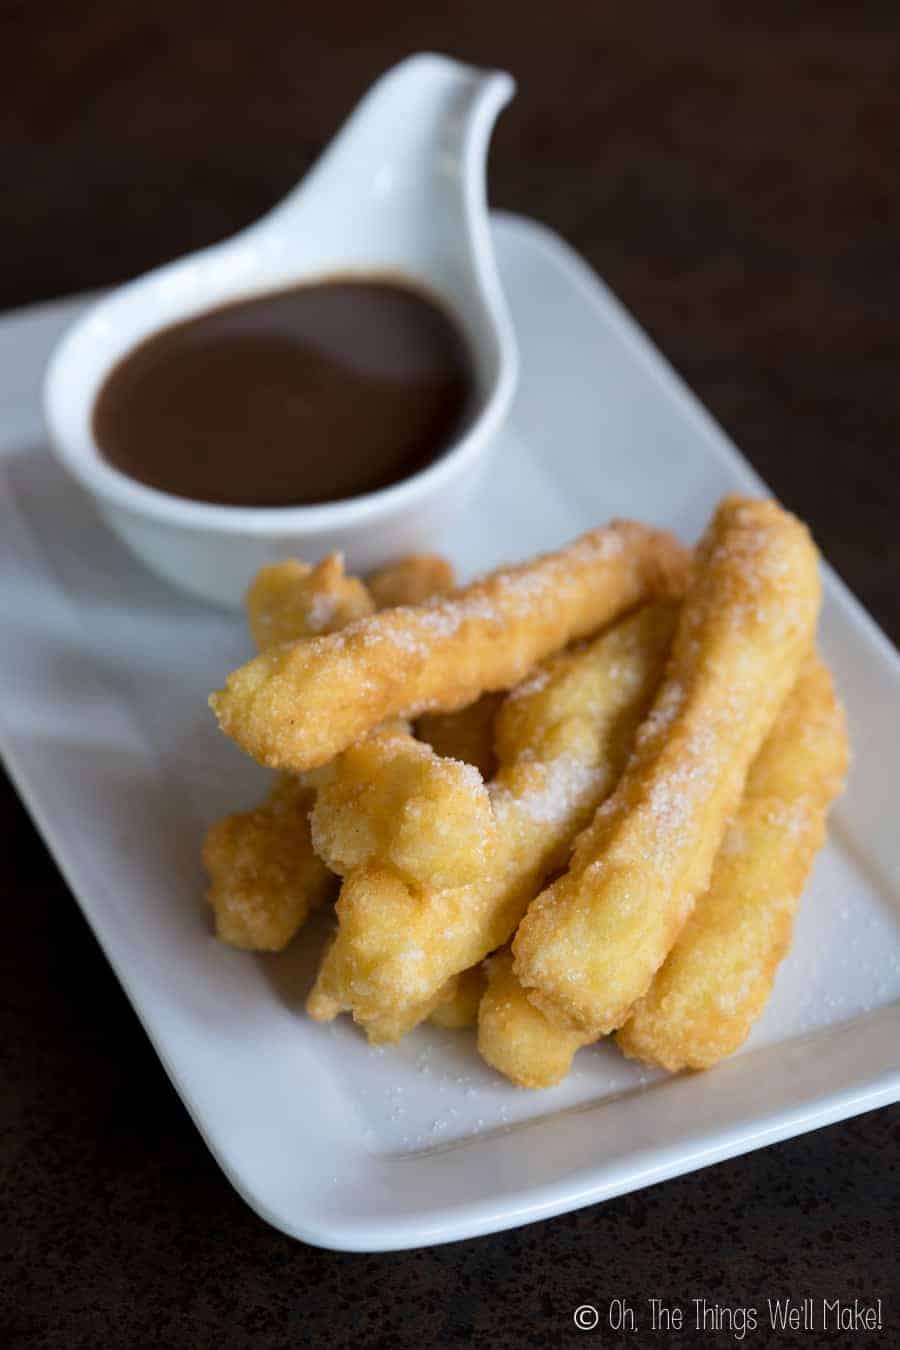 Overhead view of a plate of homemade grain free, gluten free churros with sugar sprinkled on top, next to a mug of Spanish hot chocolate